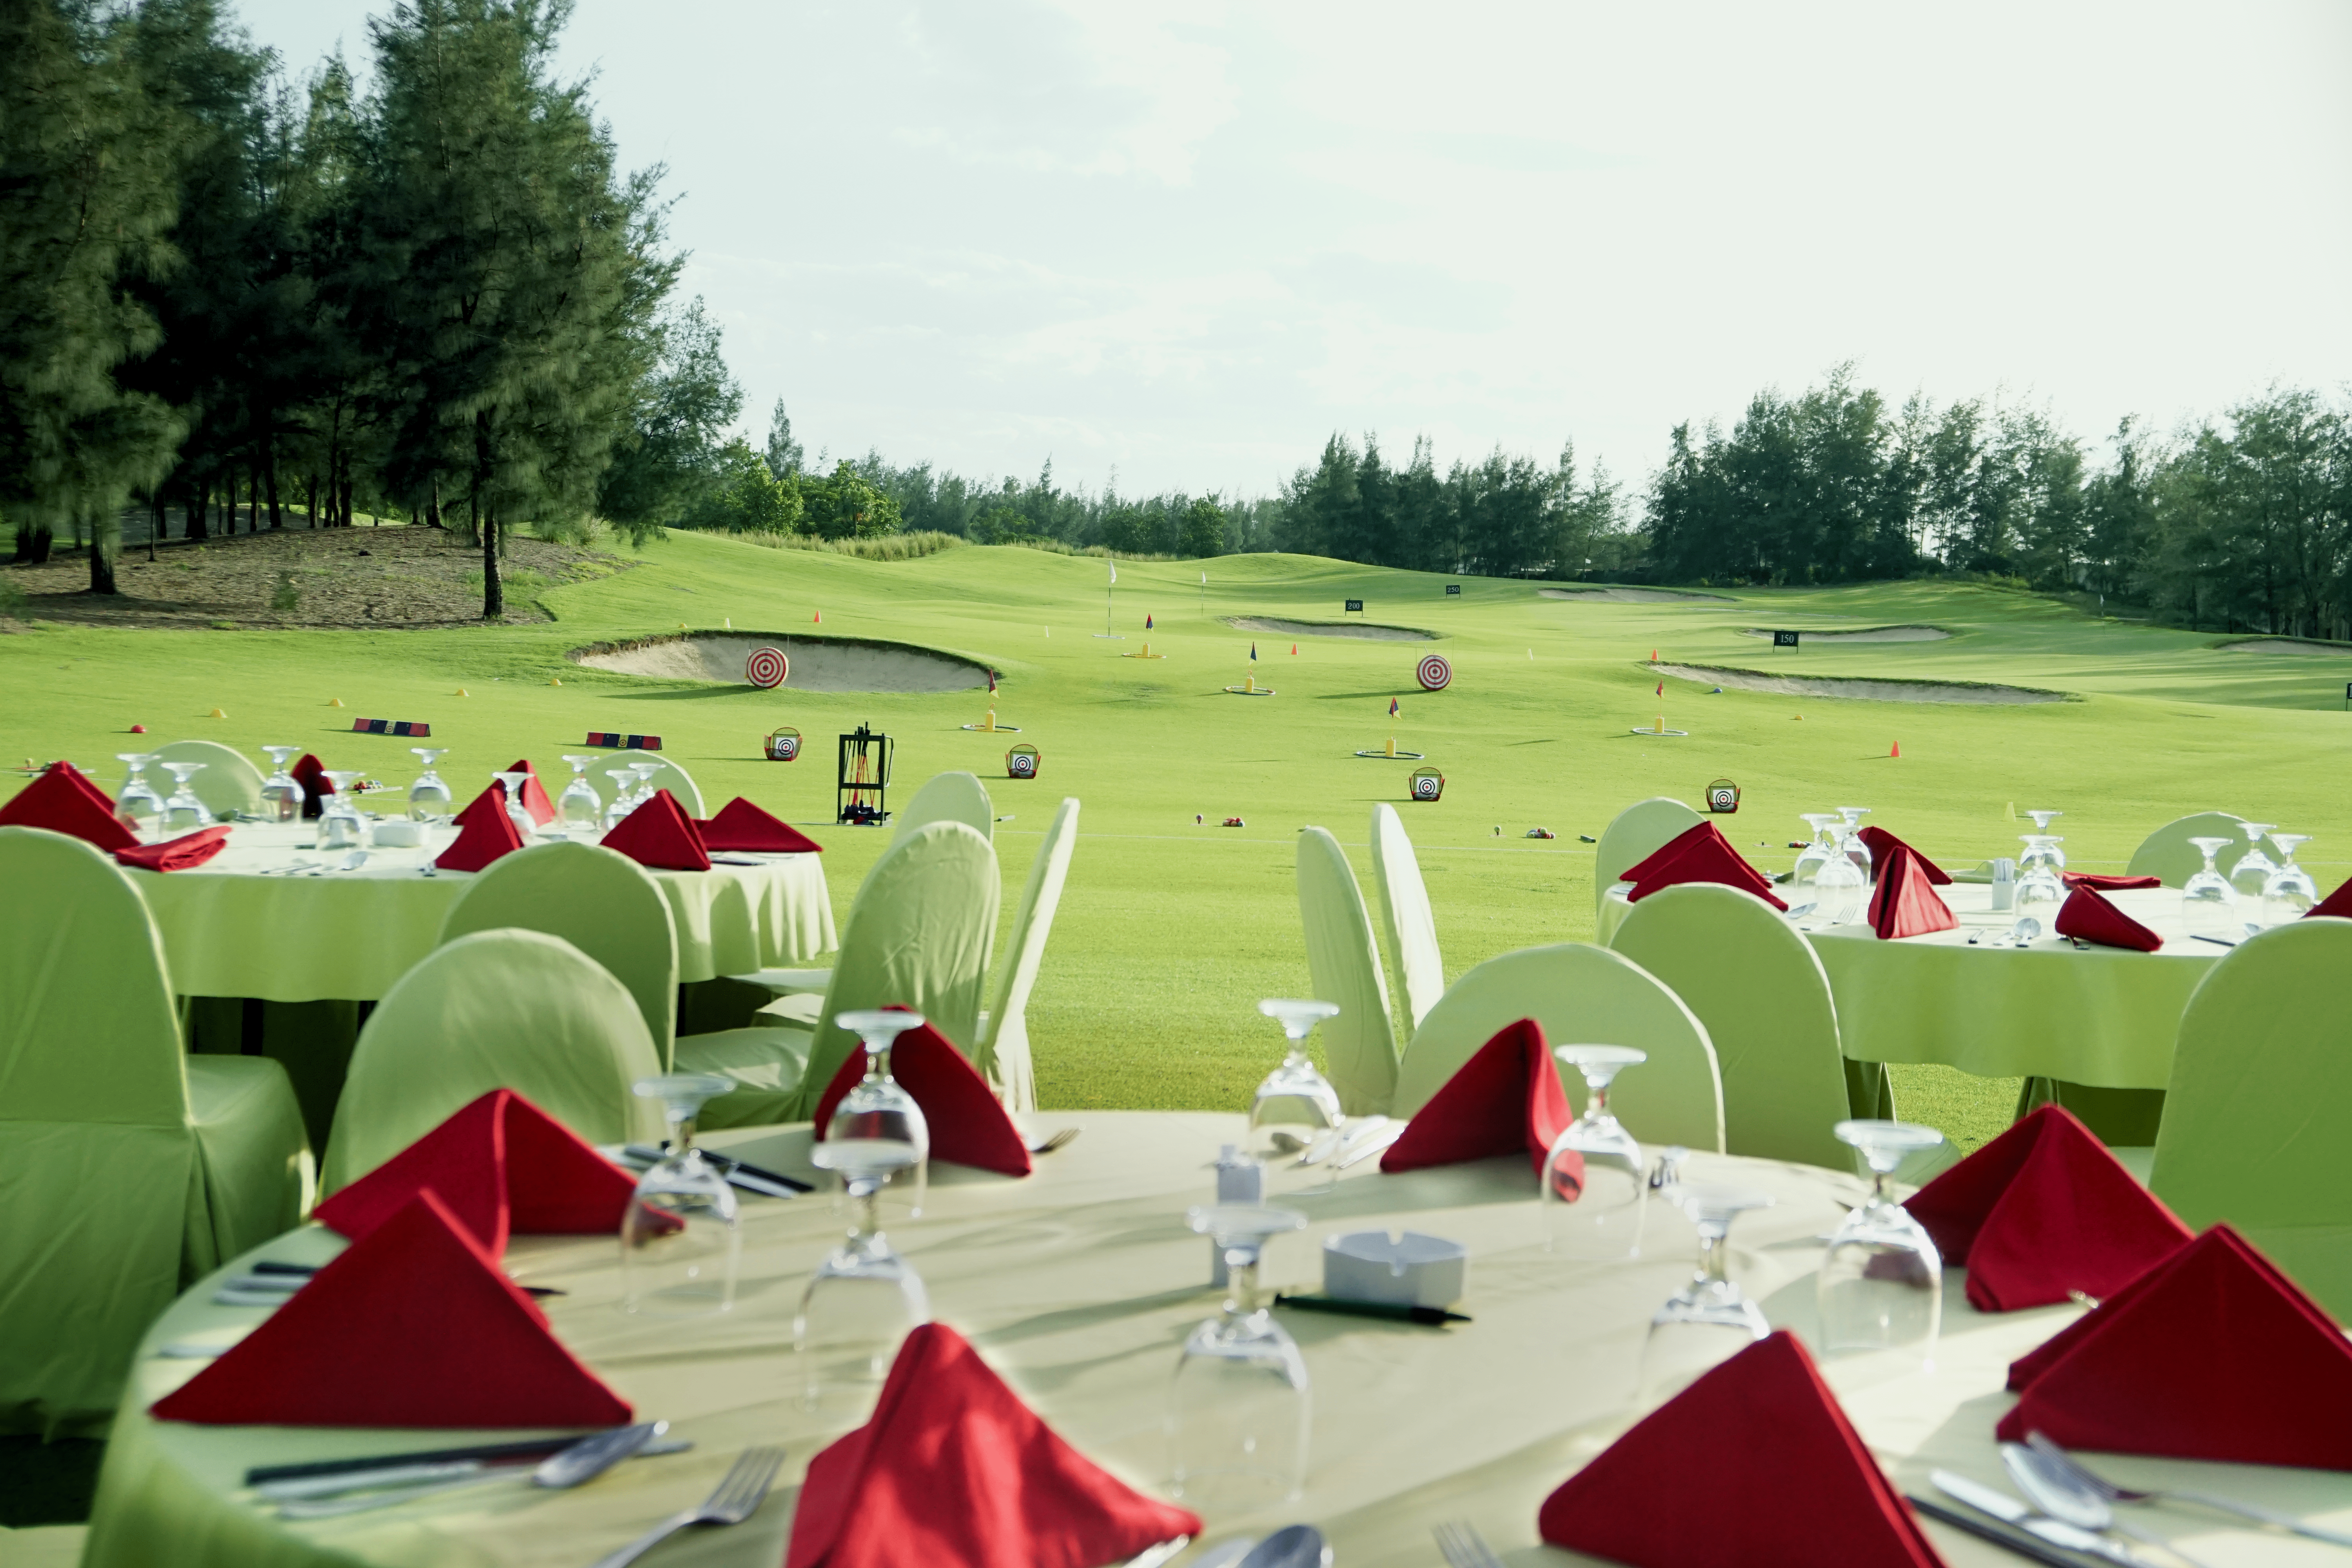 Driving Range with Gala Dinner